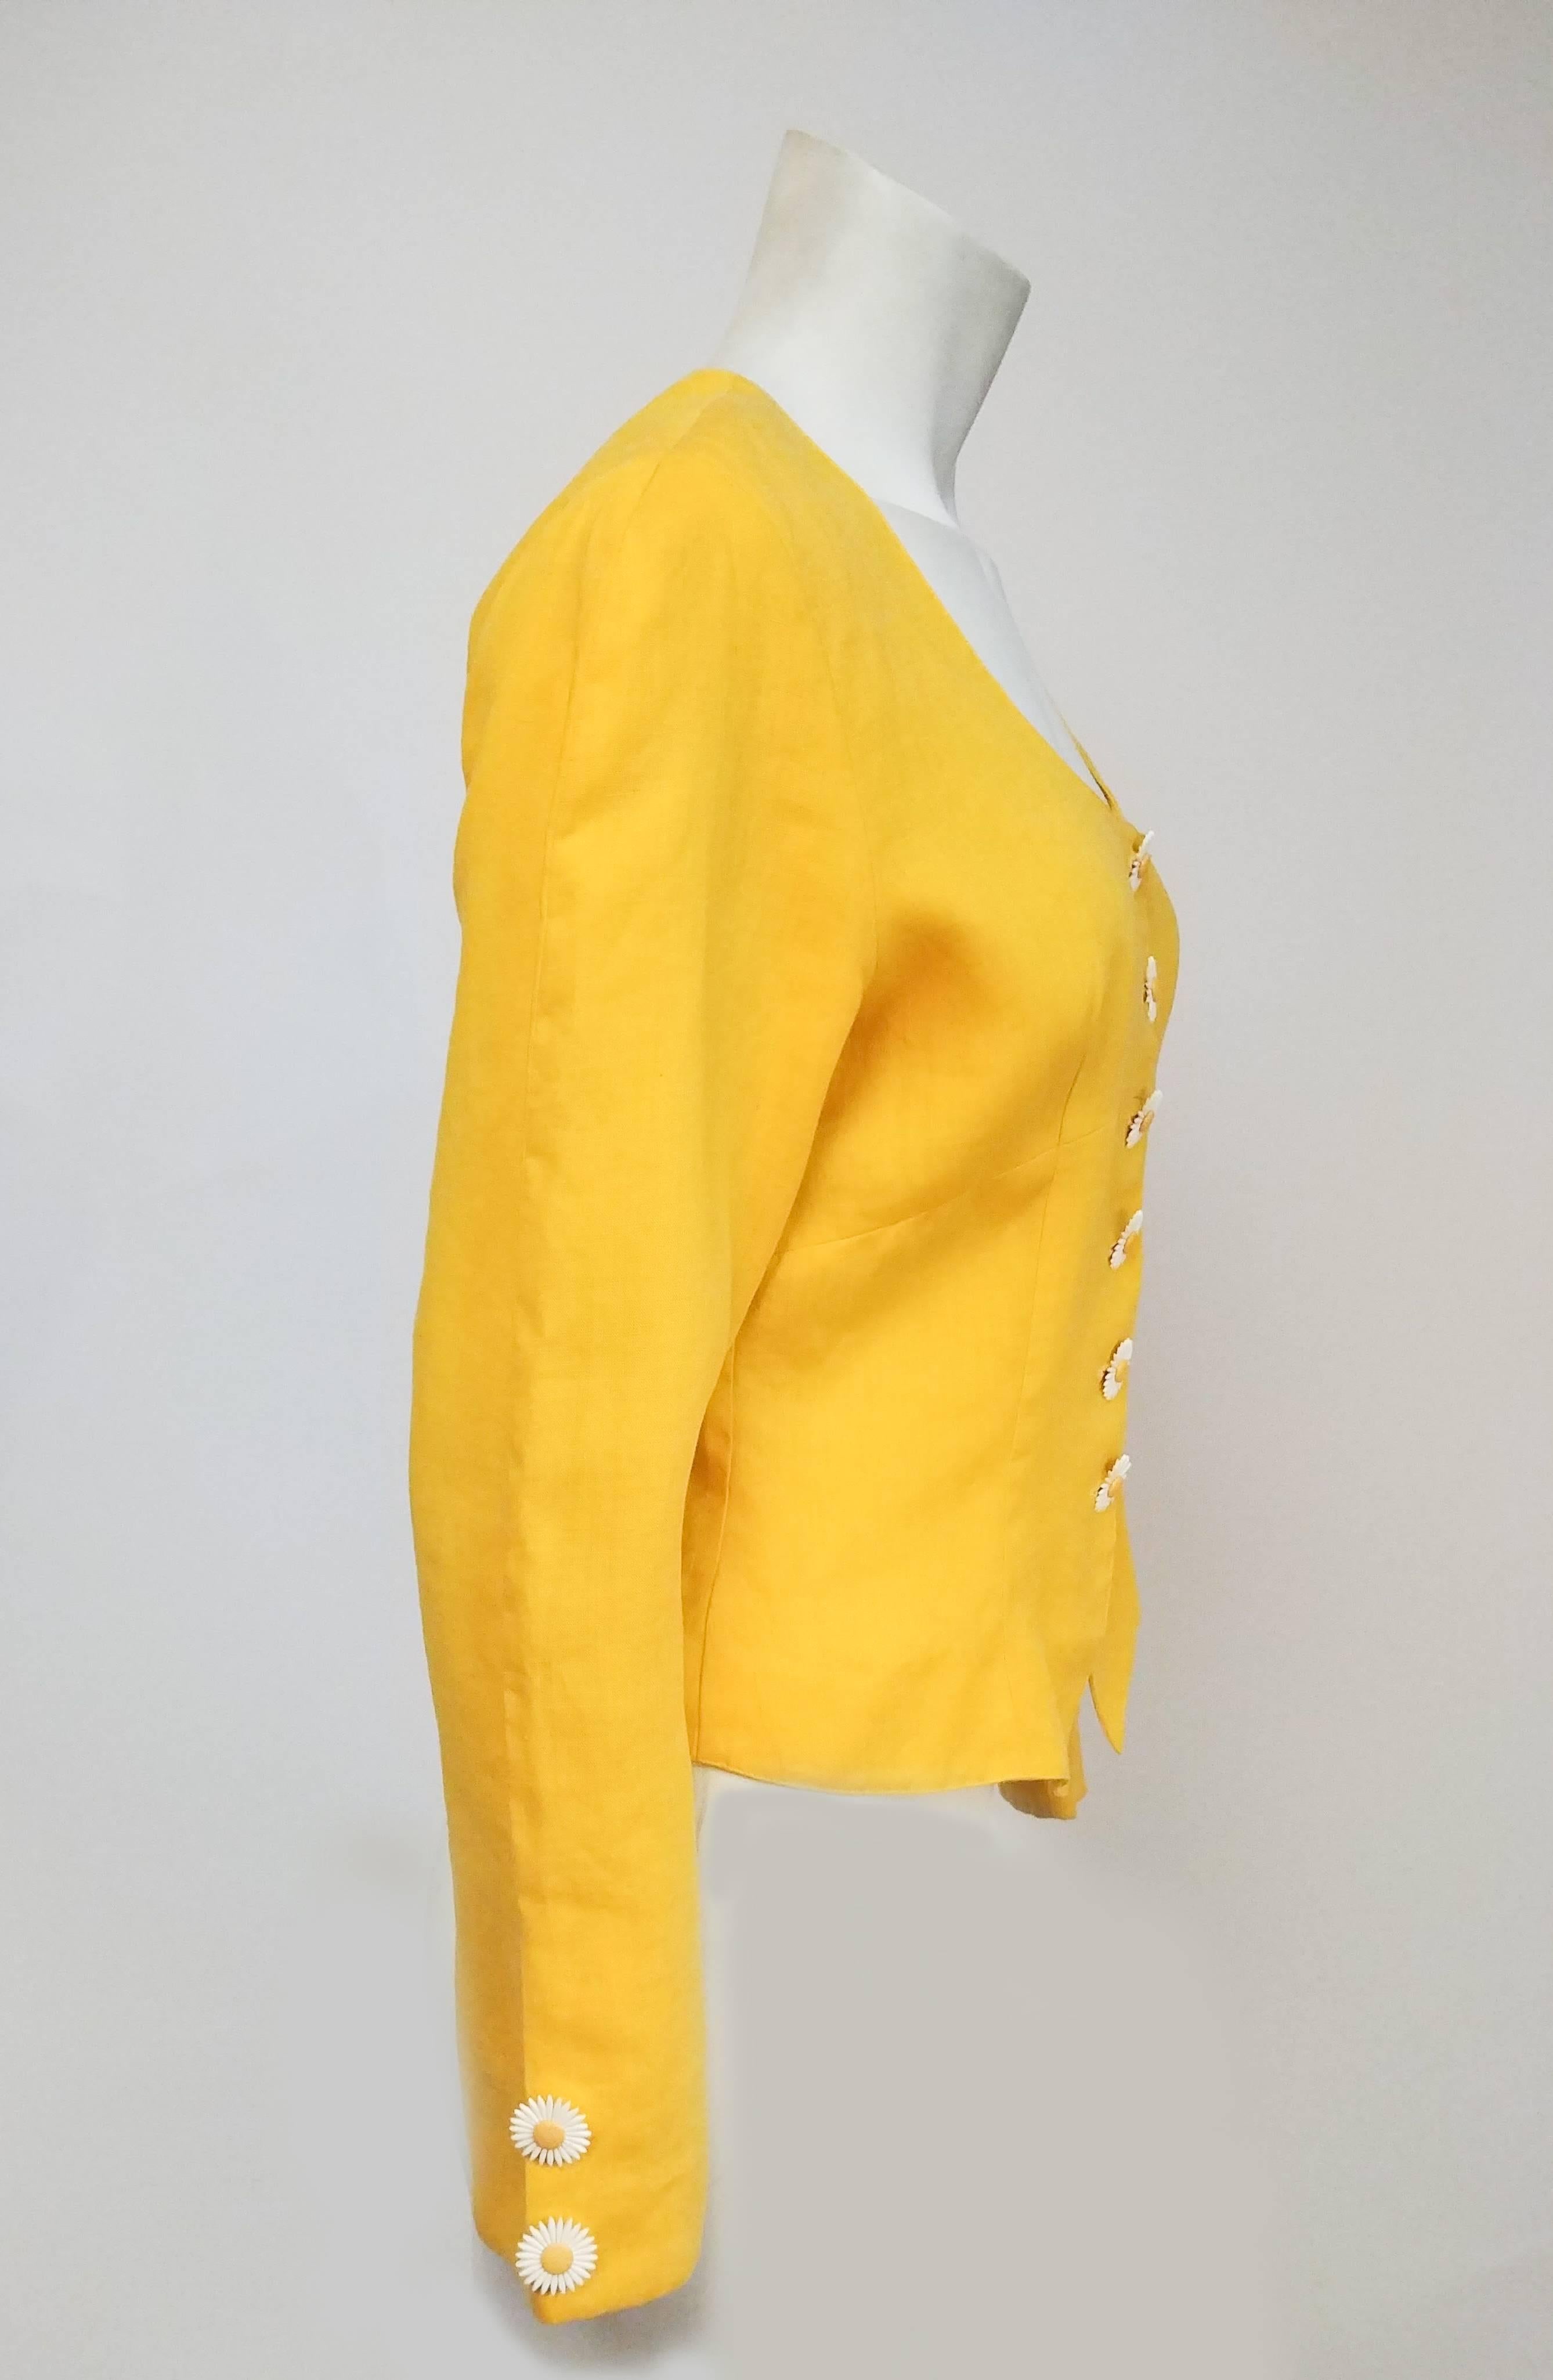 Cacharel Daisy Yellow Linen Top, 1980s  In Good Condition For Sale In San Francisco, CA